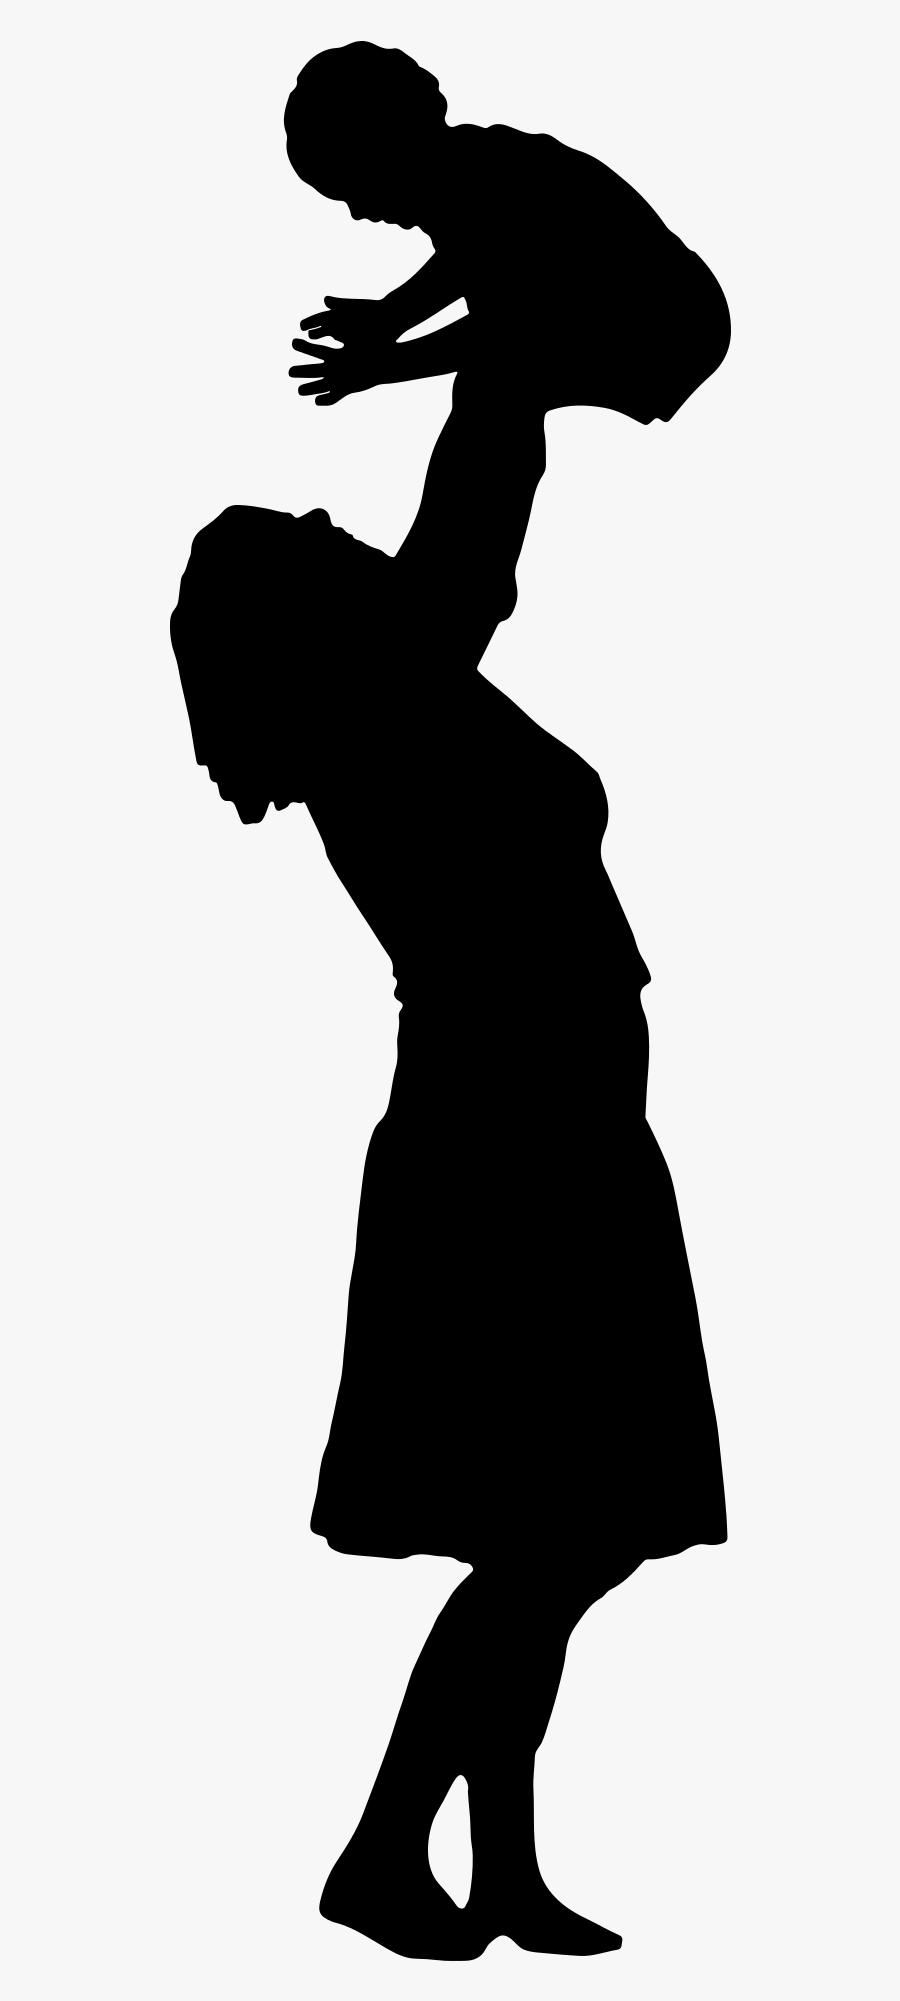 Mom And Child Silhouette - Mother With Baby Silhouette Png, Transparent Clipart